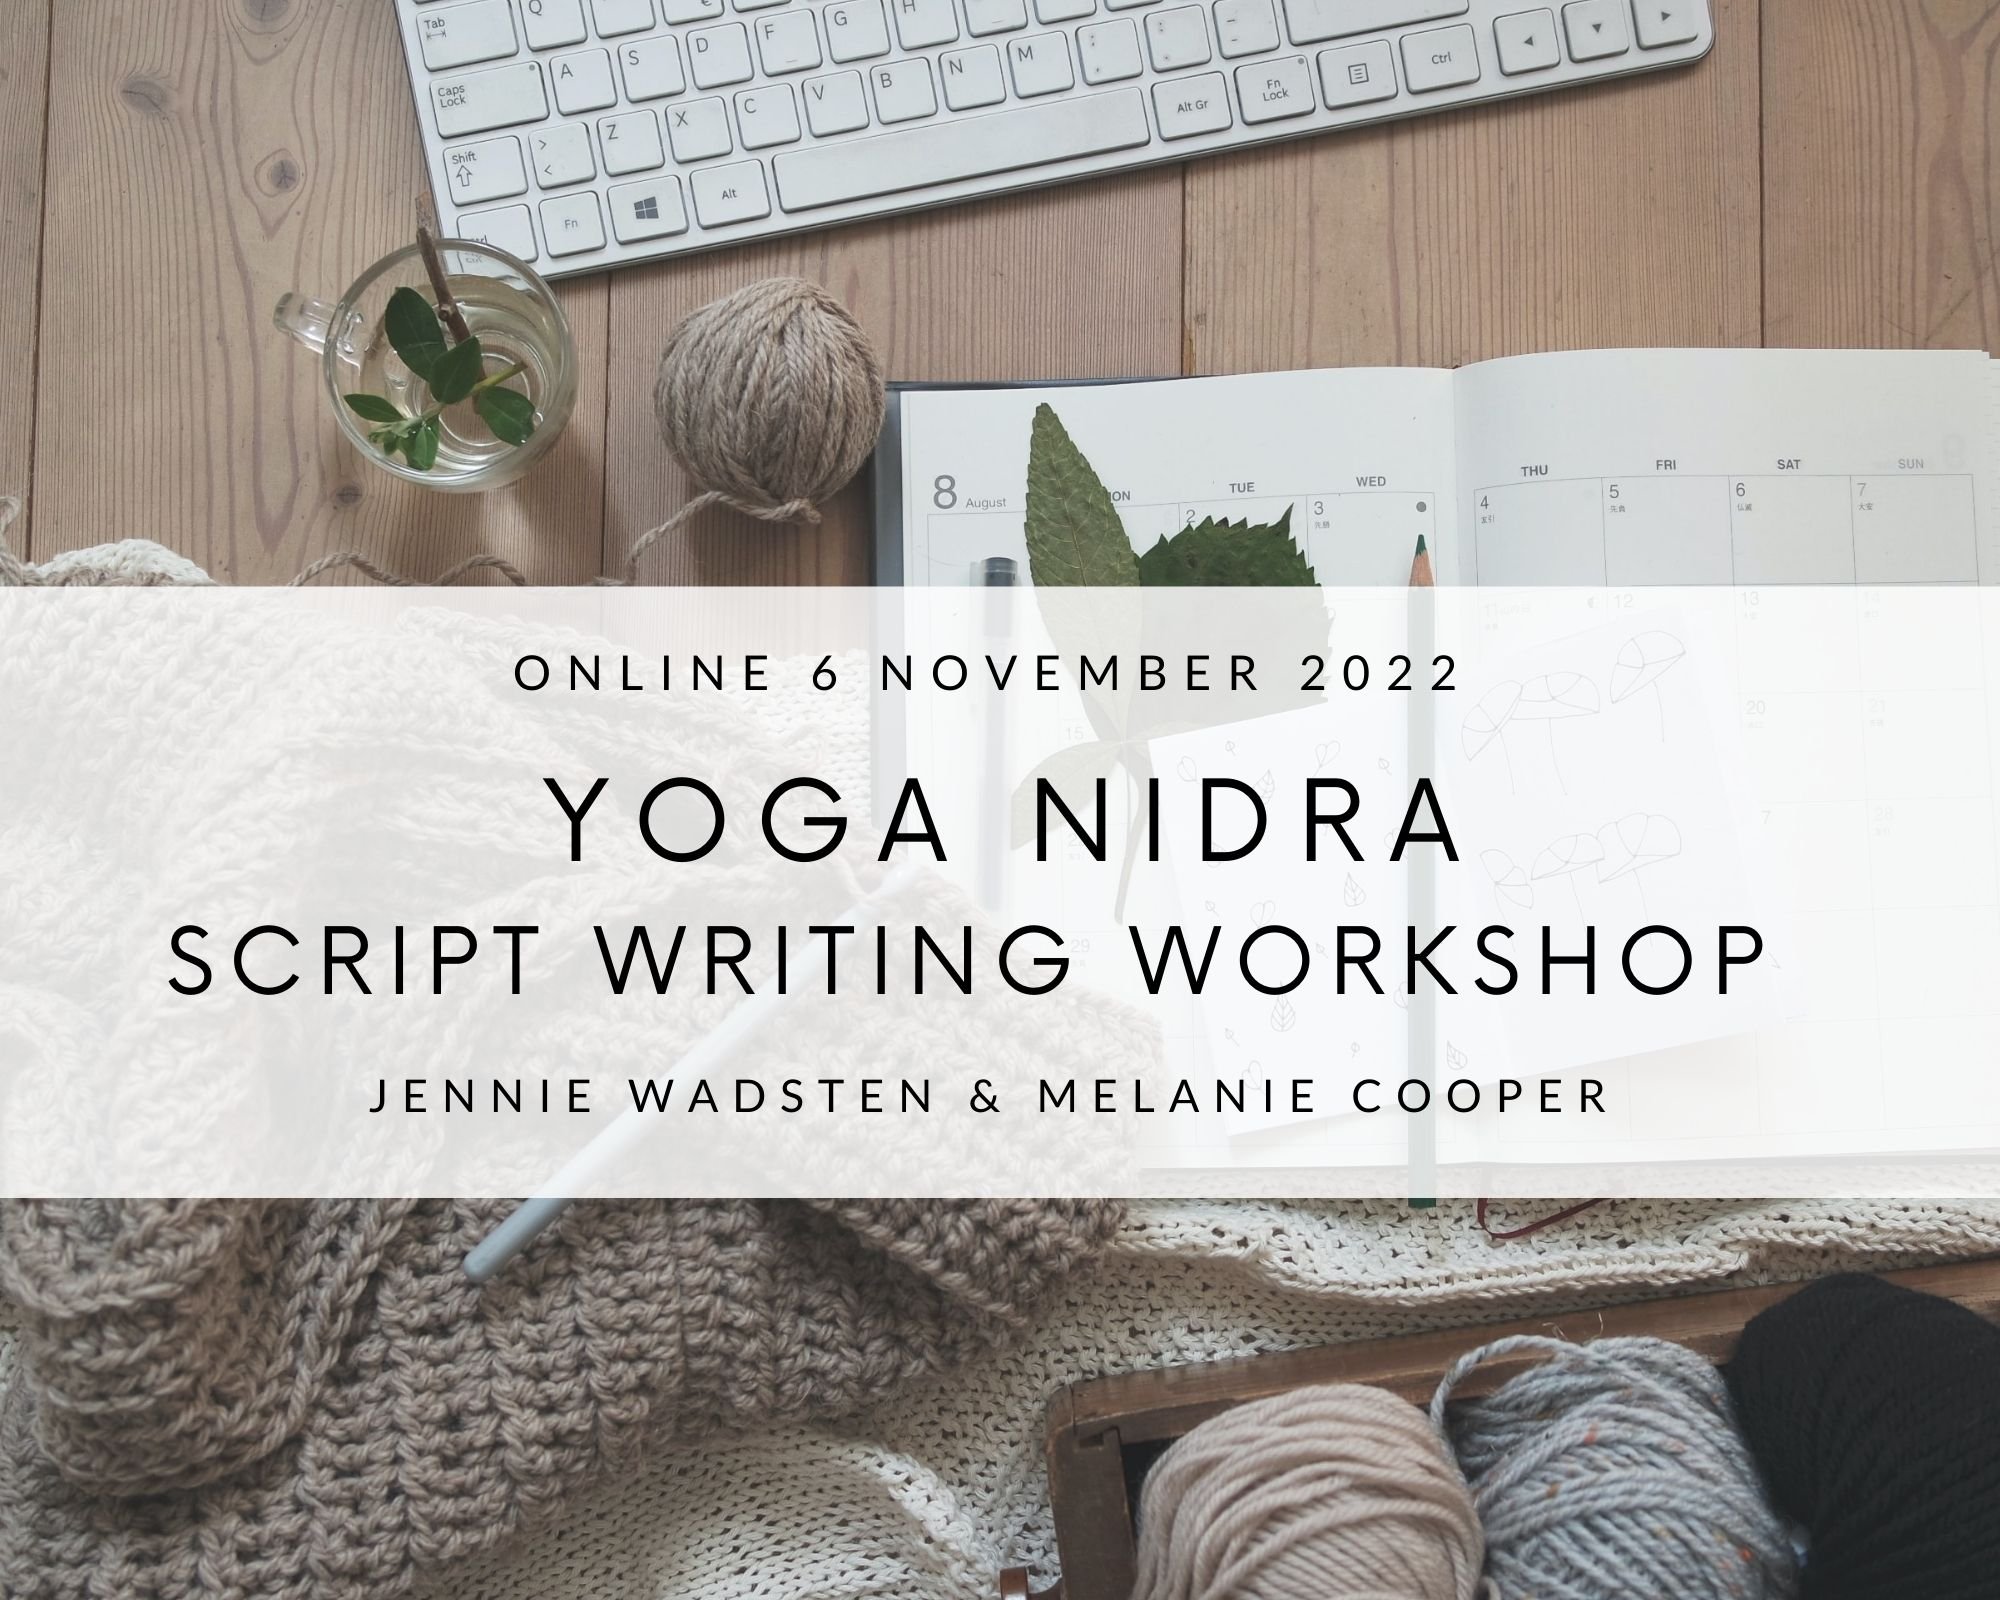 Yoga nidra weekly online practice with journaling prompts for